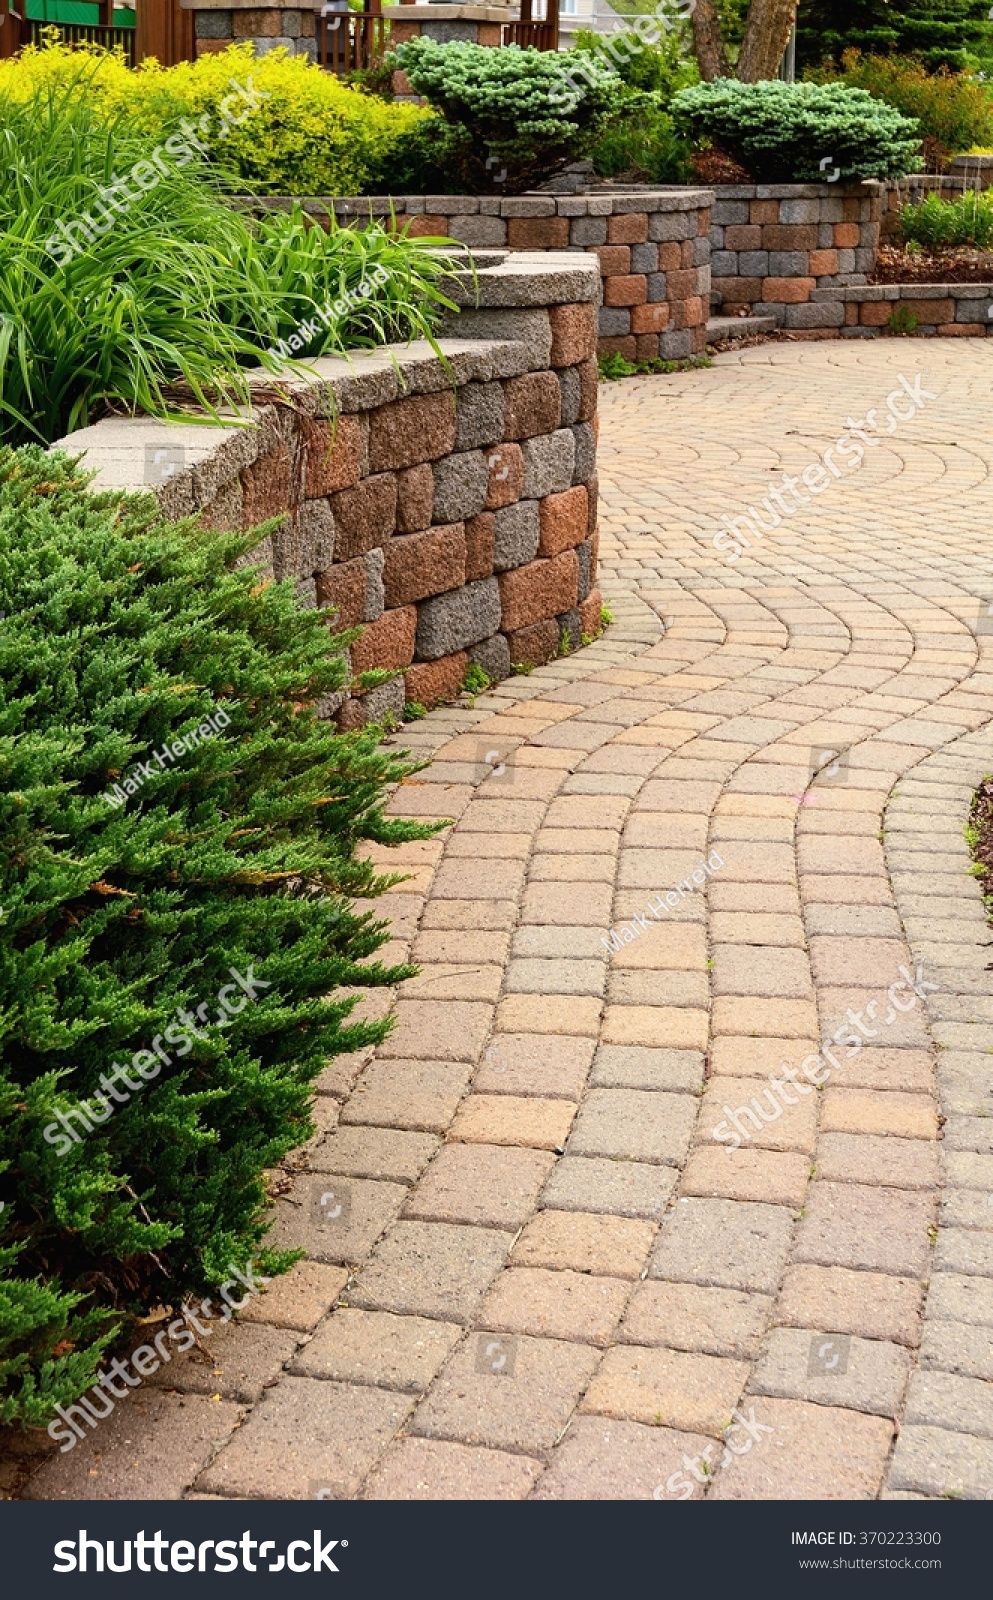 Retaining Wall Patio Landscaping Pavers Stock Photo Edit Now 370223300